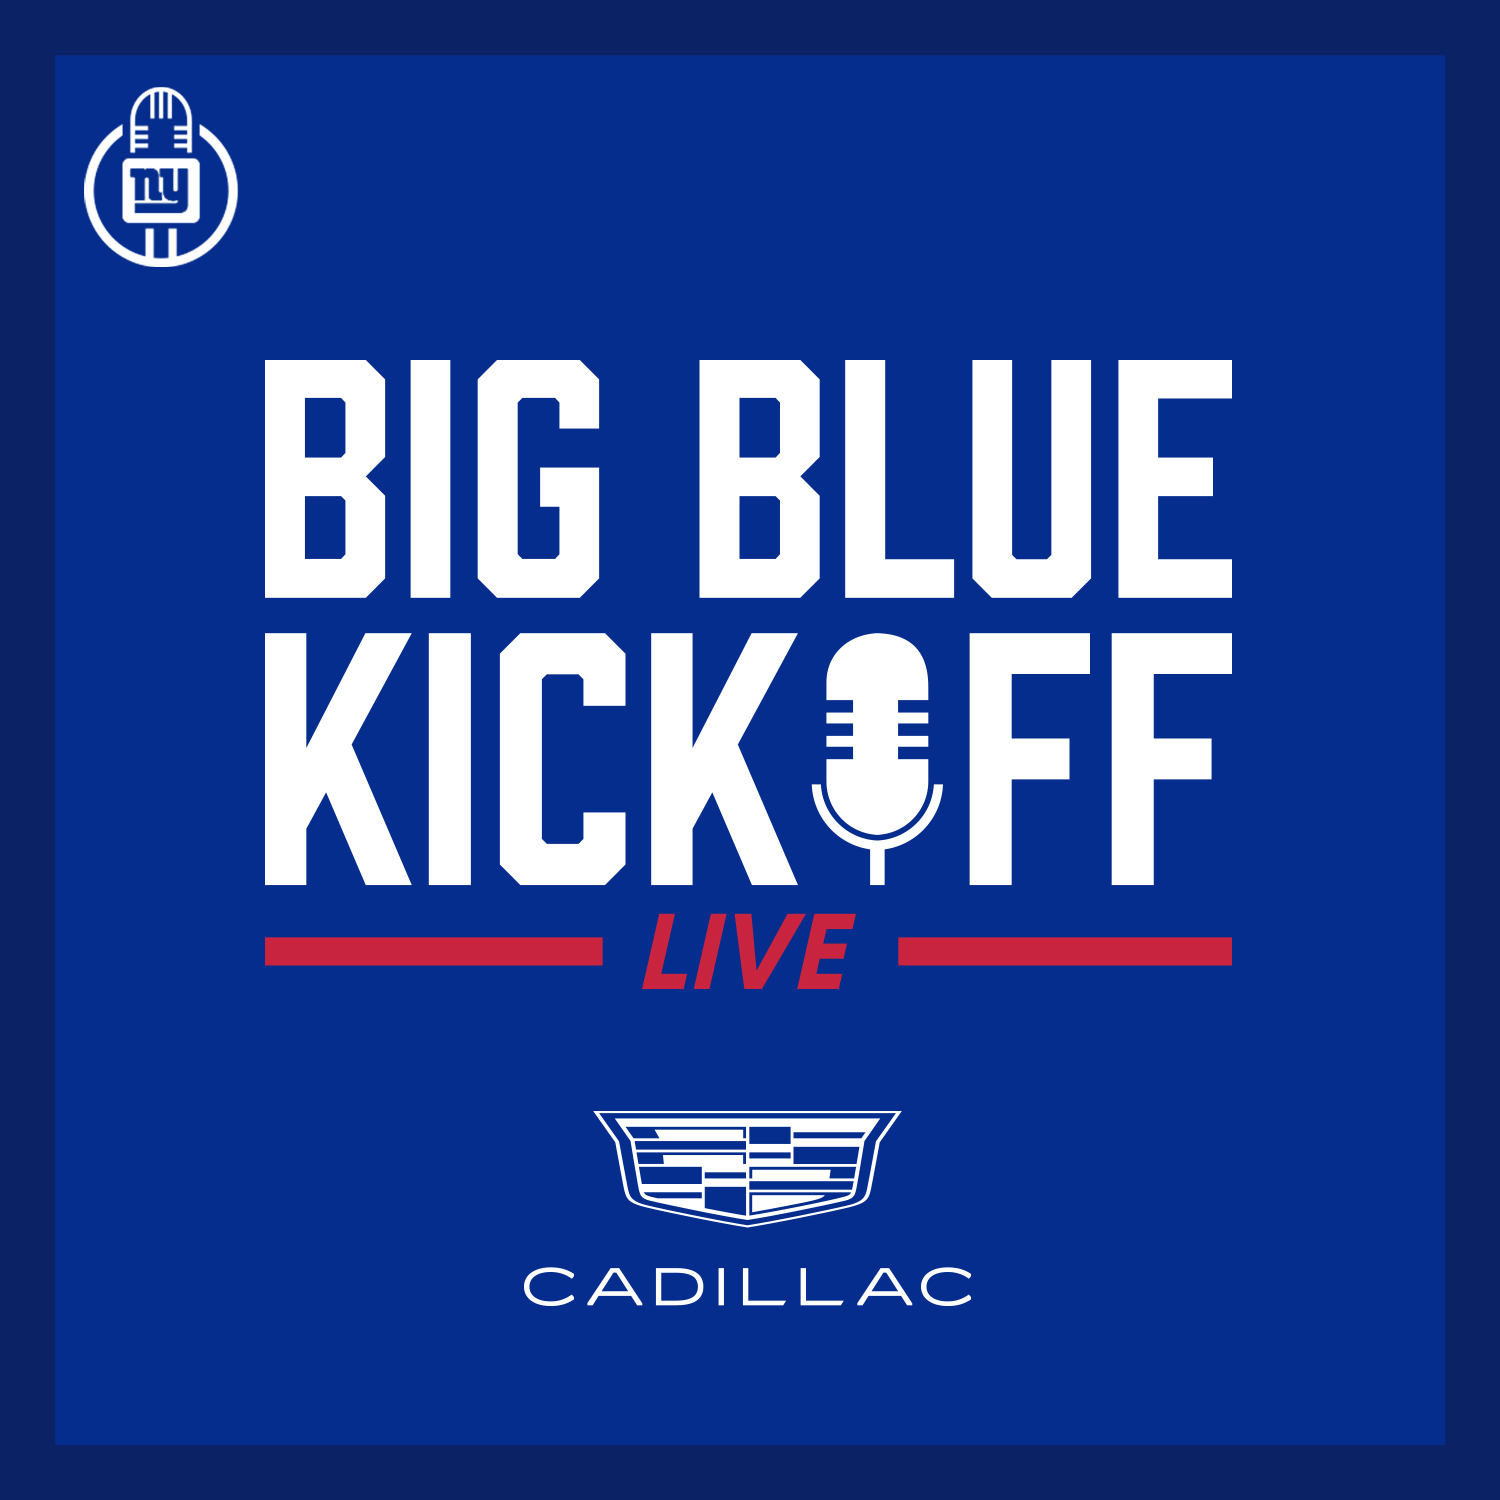 Big Blue Kickoff Live 3/4 | Jason Fitzgerald from Over The Cap joins the show